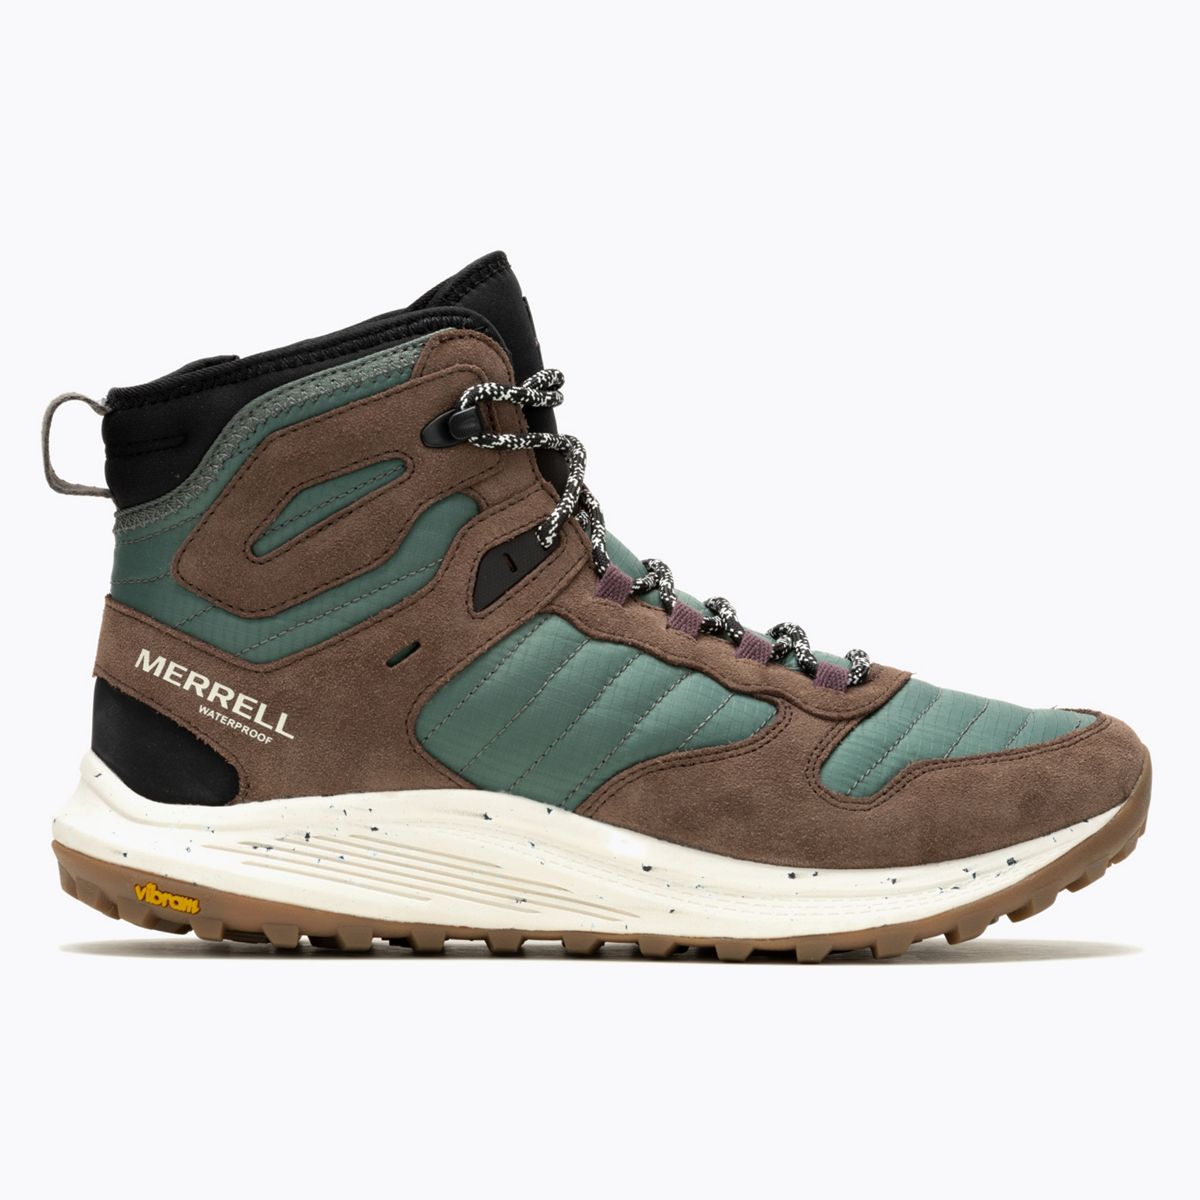 Shop All Winter Hiking Boots